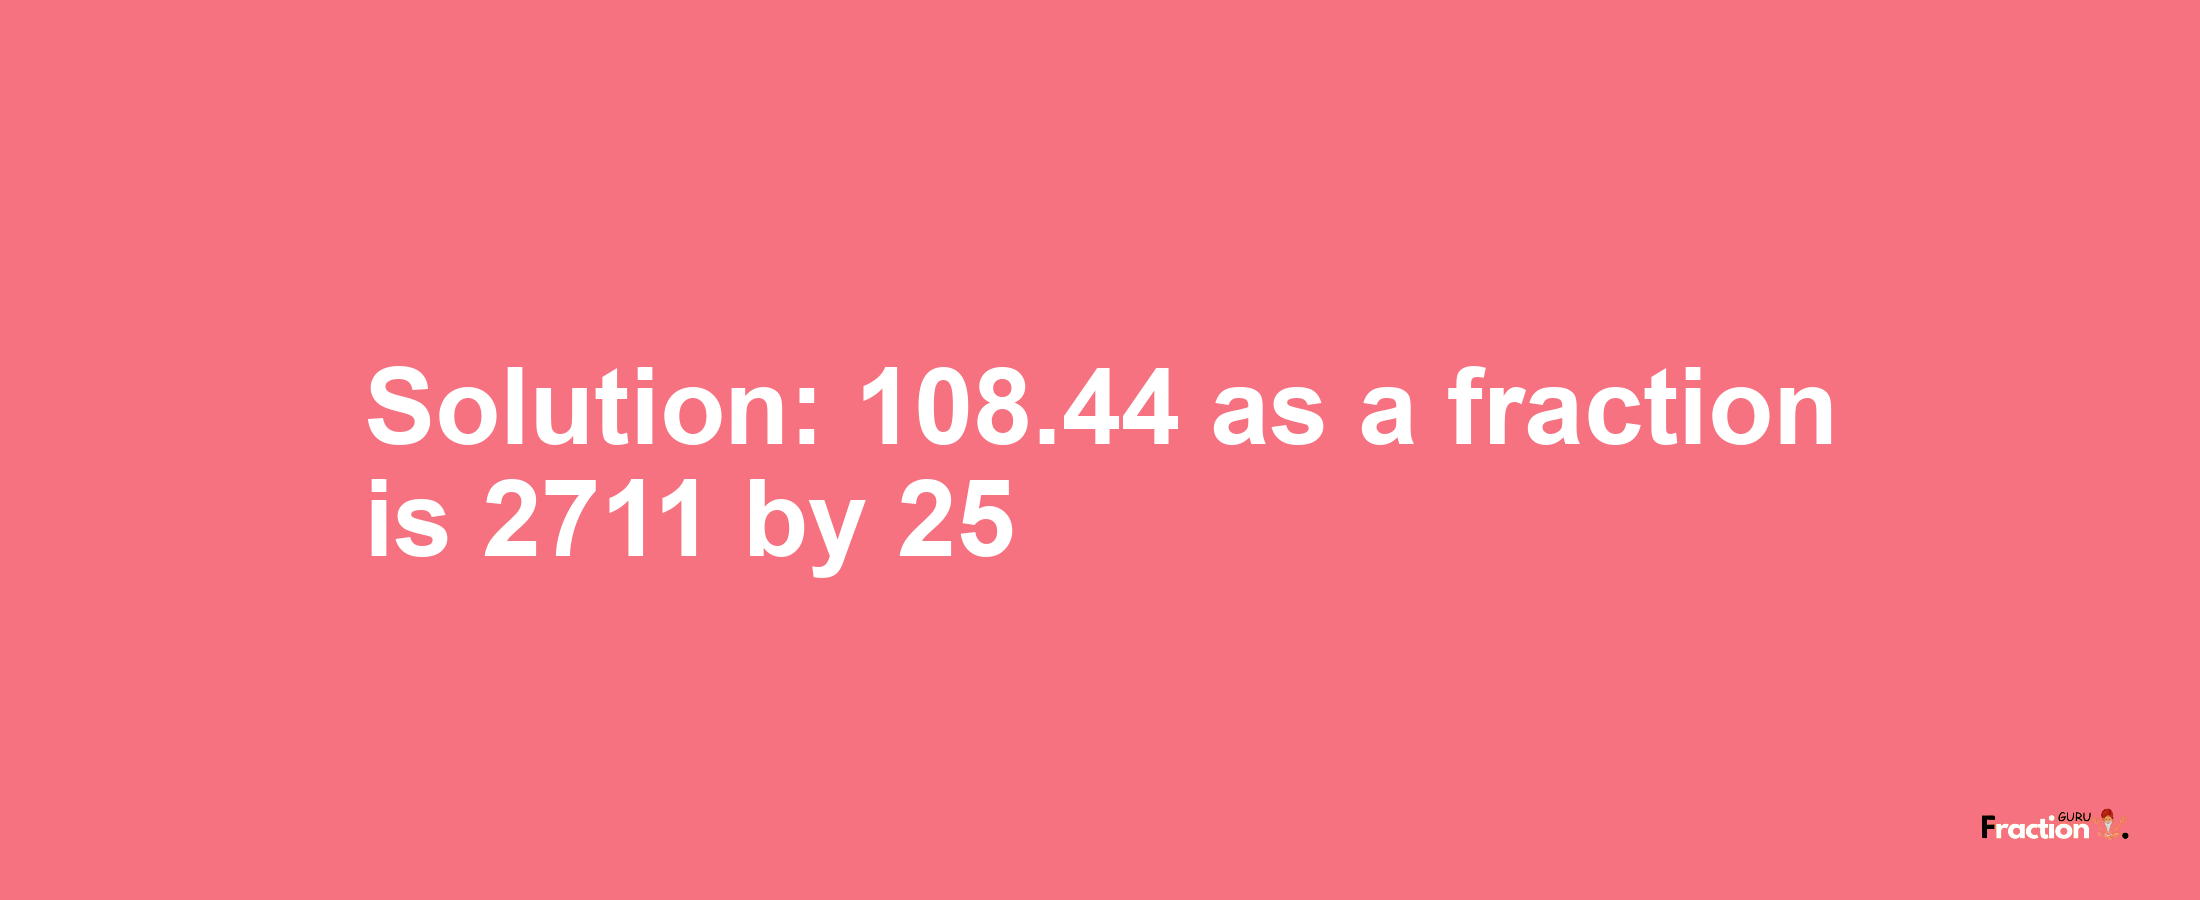 Solution:108.44 as a fraction is 2711/25